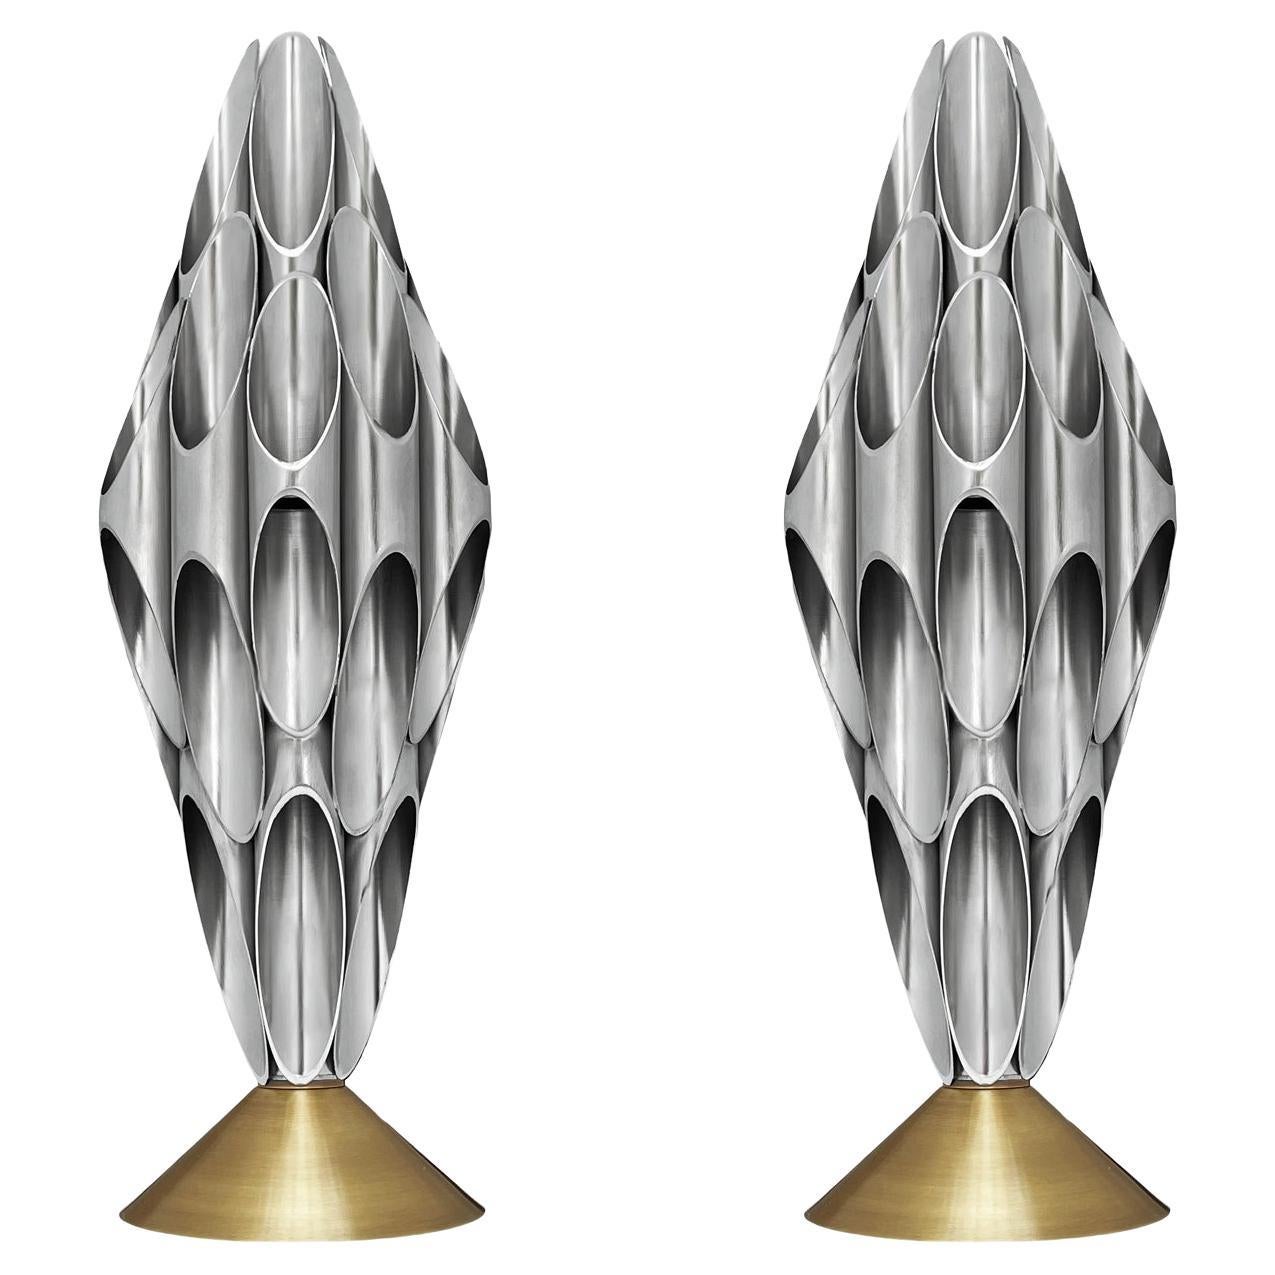 Pair of Hollywood Regency Glam Table Sculpture Accent Lamps in Gold & Silver For Sale